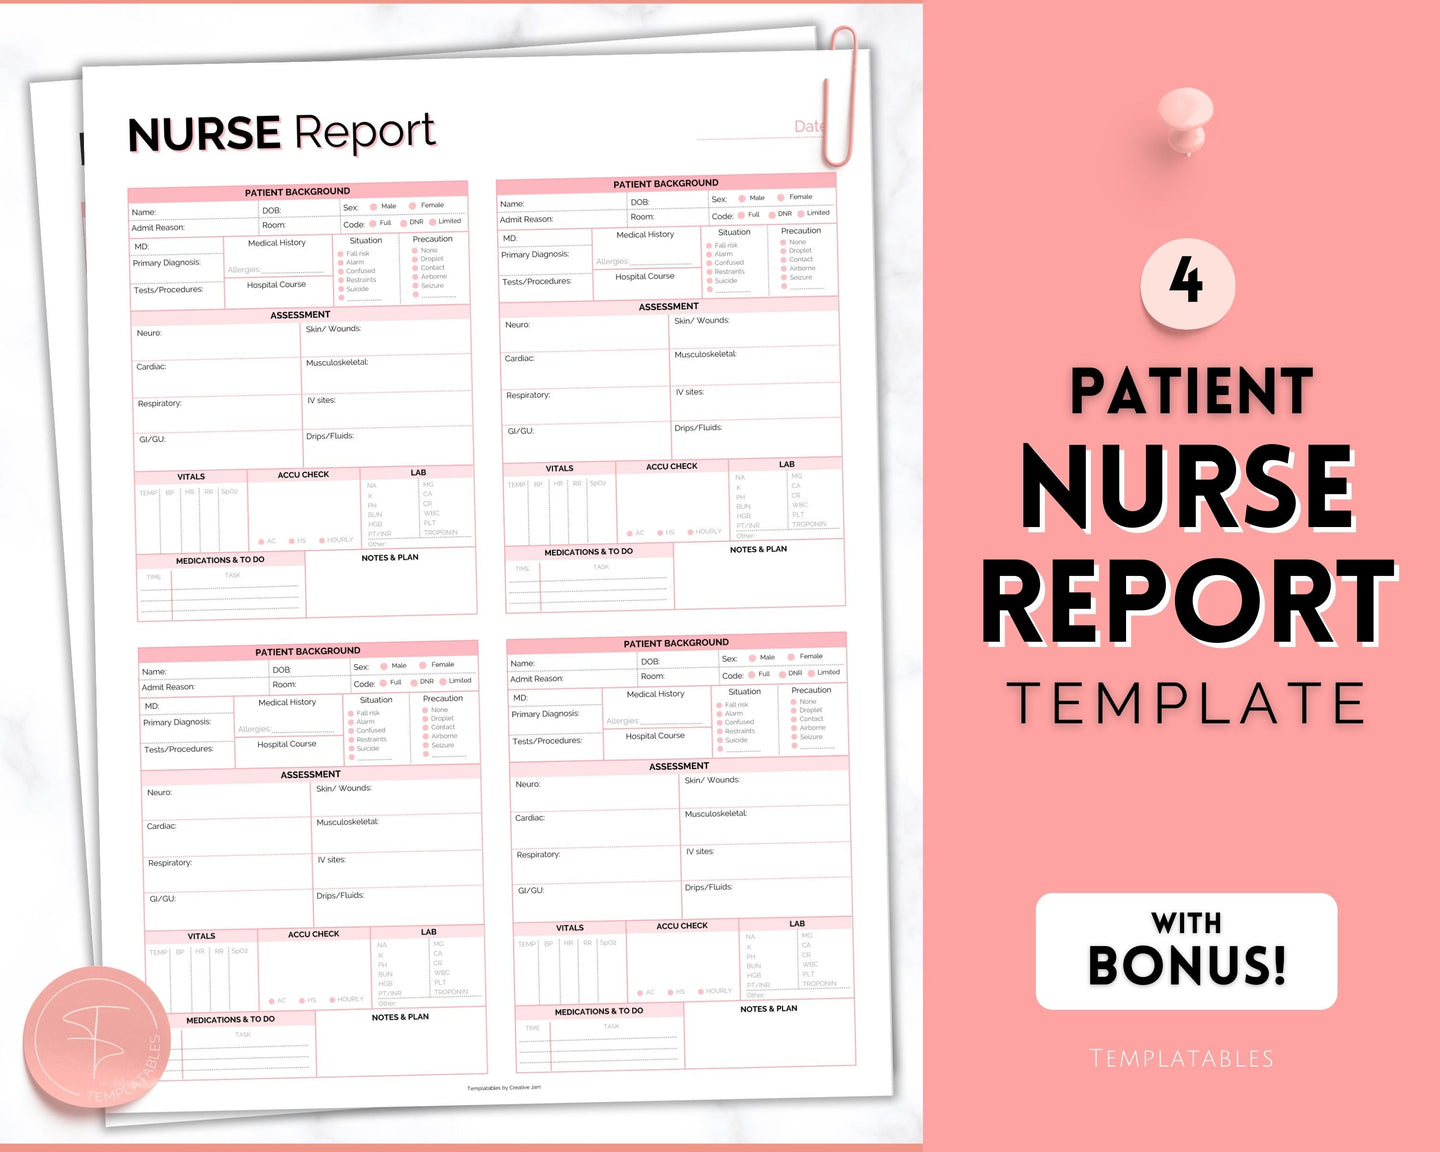 4 Patient Nurse Report Sheet to Organize your Shifts | Nurse Brain Sheet, ICU Nurse Report Patient Assessment Template | Pink